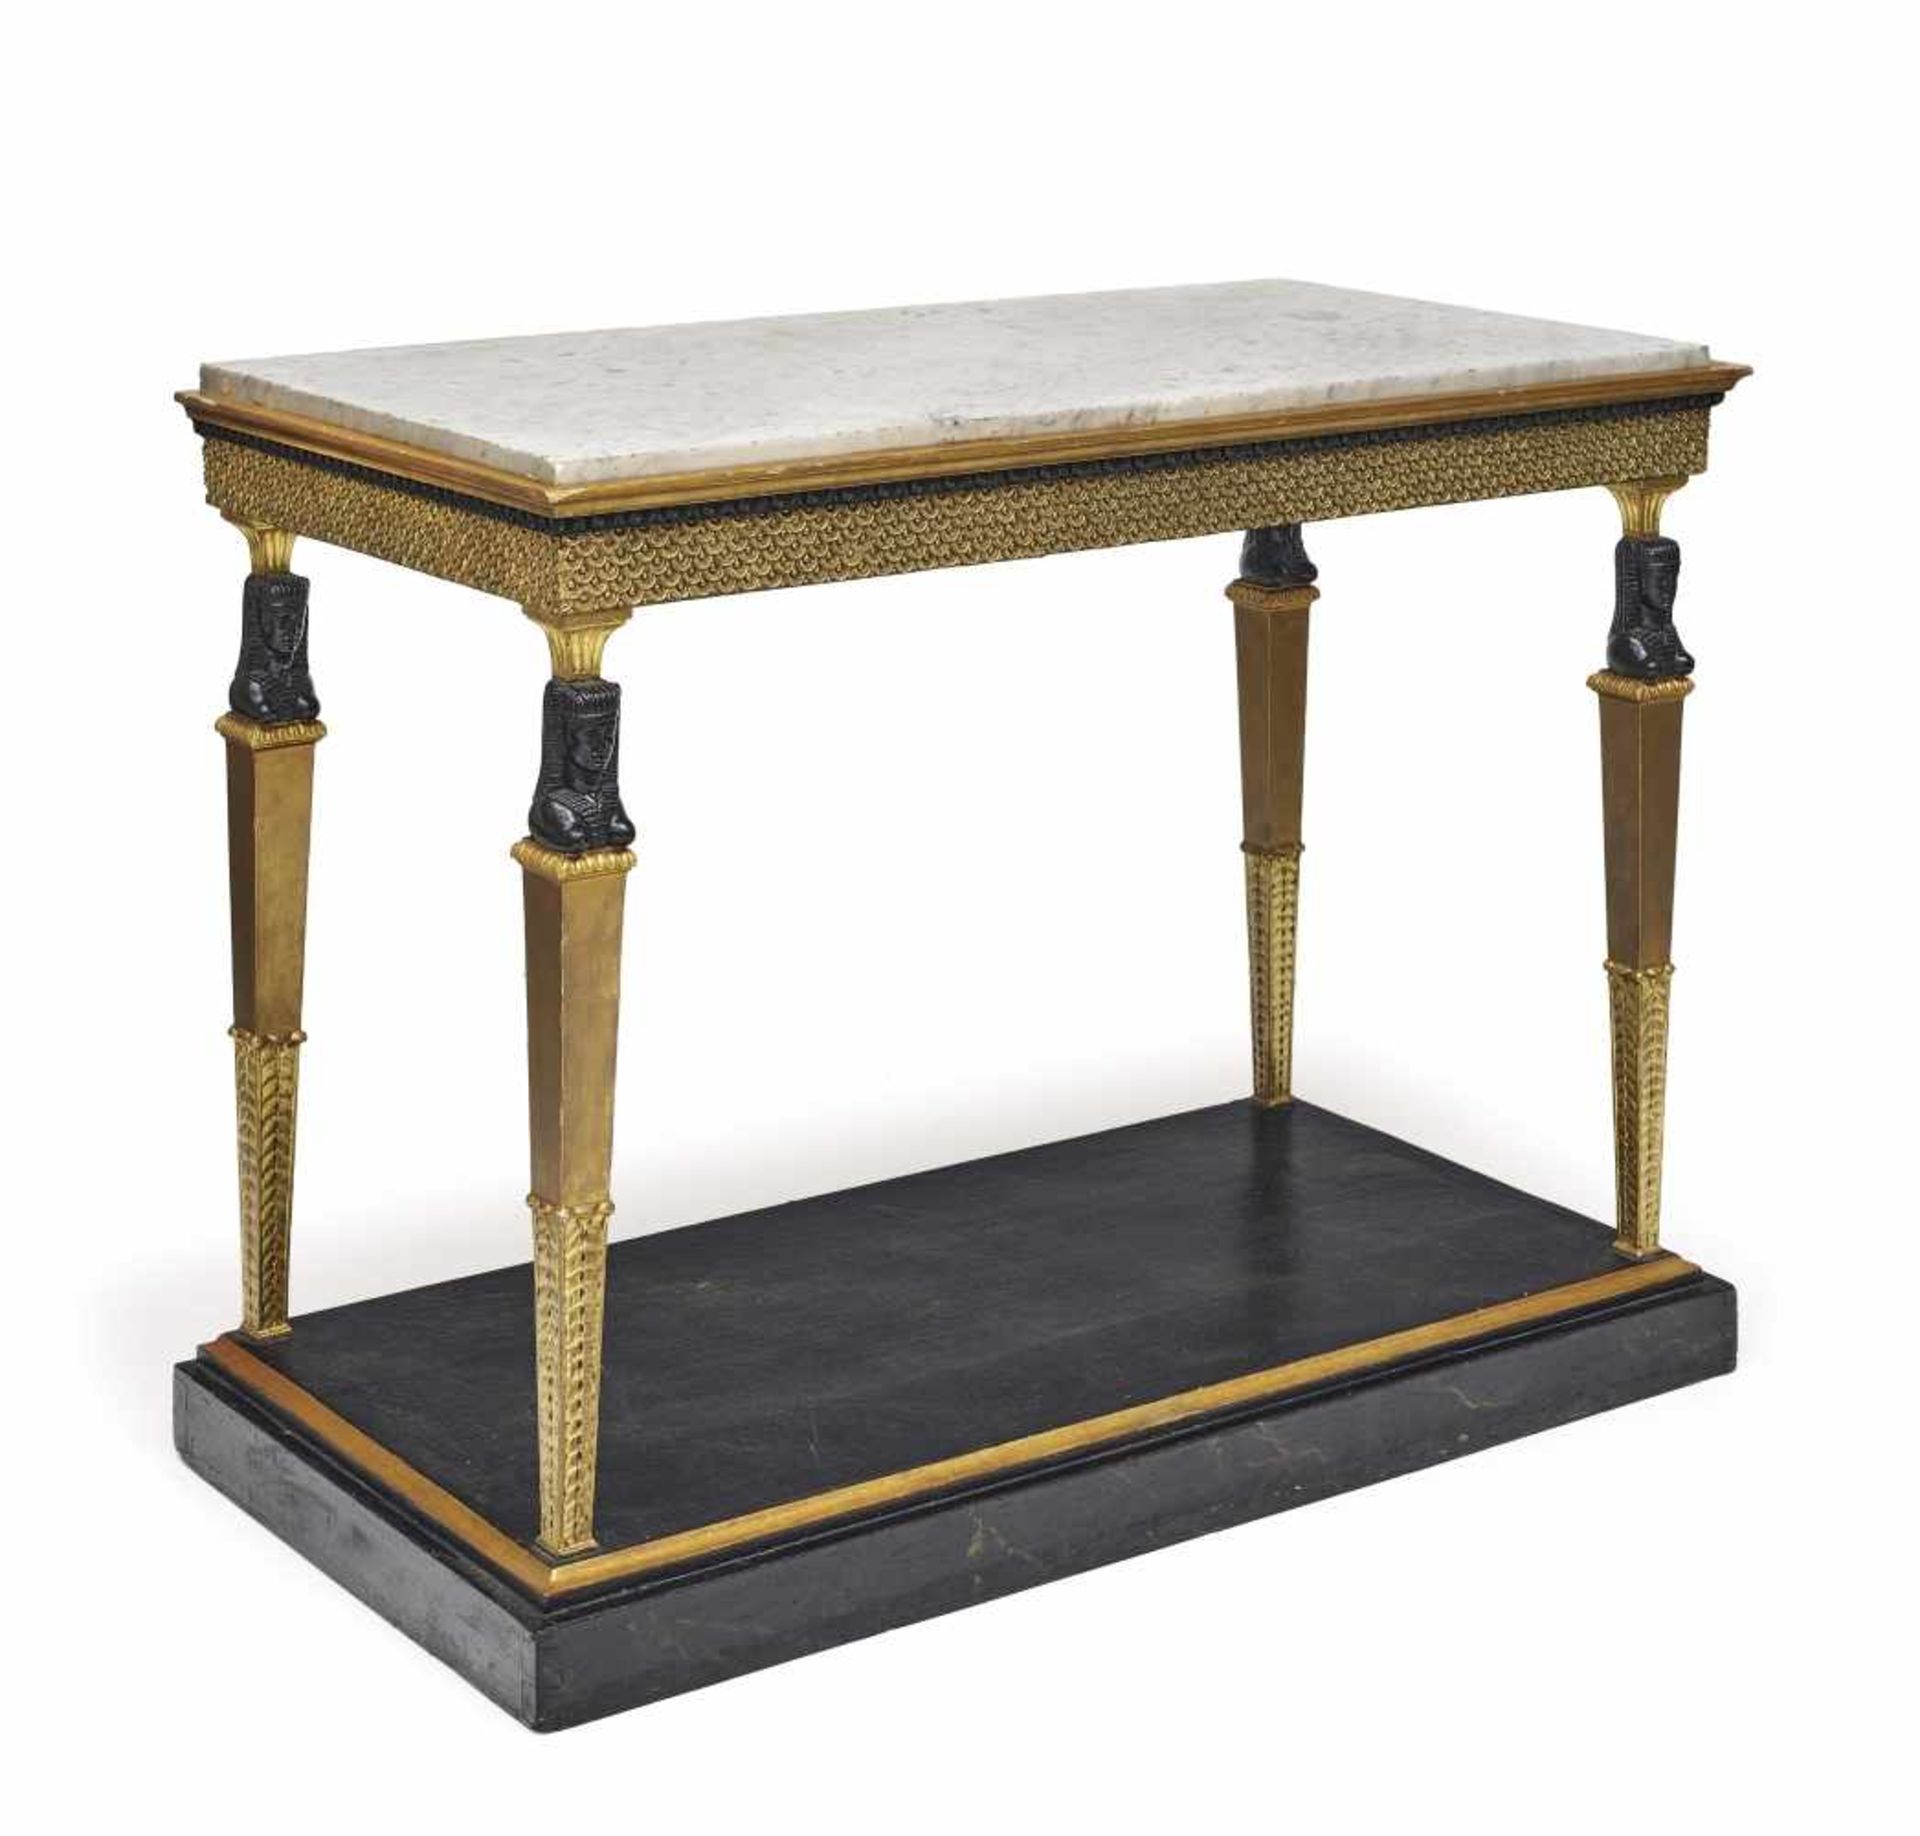 A console tableSweden, 1st half of the 19th century Wood, painted in gold and black. White grey